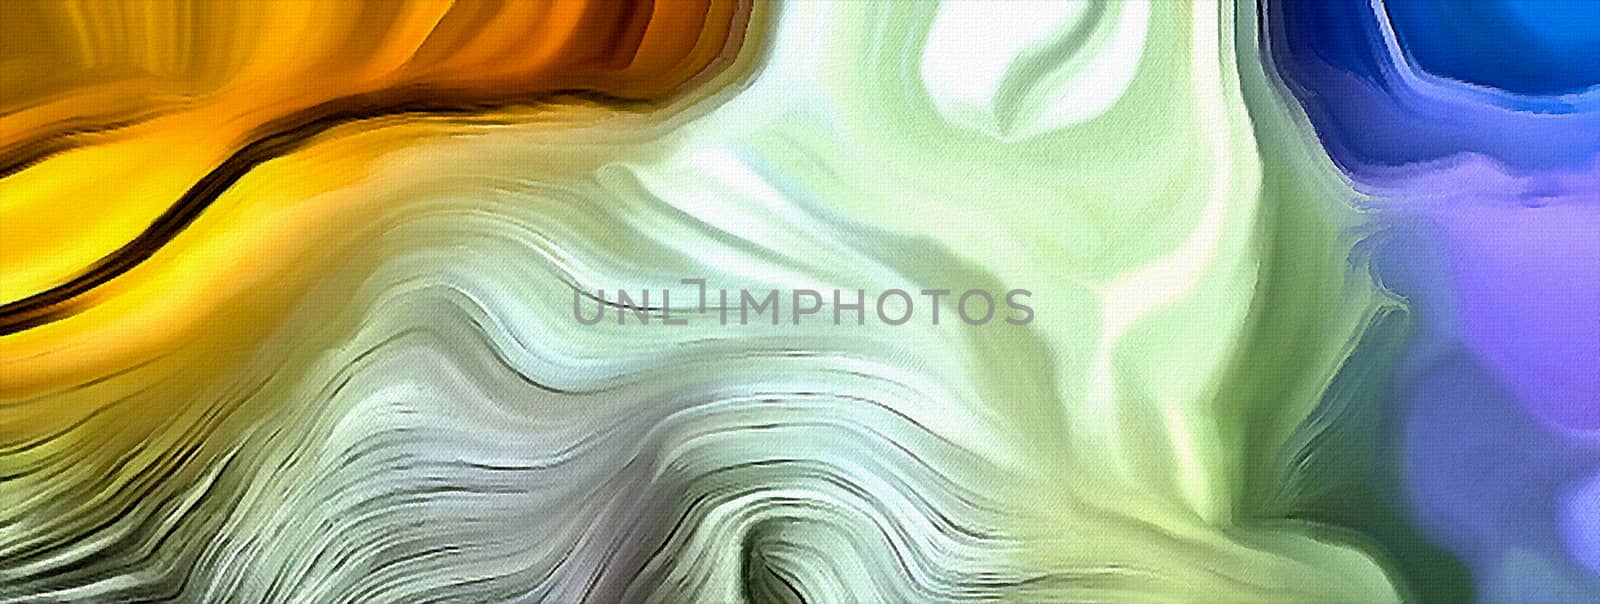 Swirling Pastel Colors Abstract by applesstock